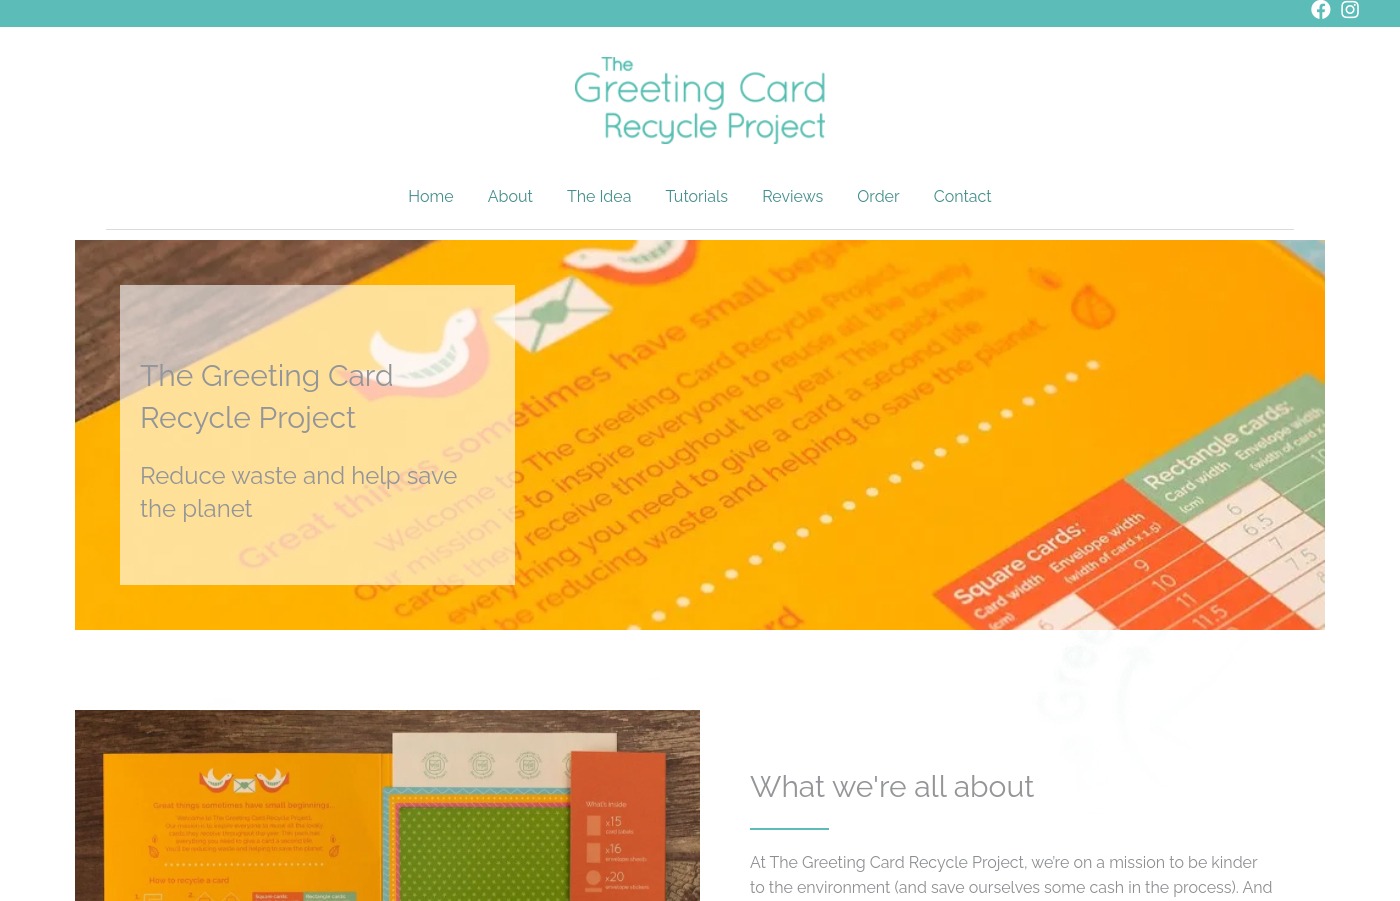 Recycle-Greeting-Cards-with-The-Greeting-Card-Recycle-Project